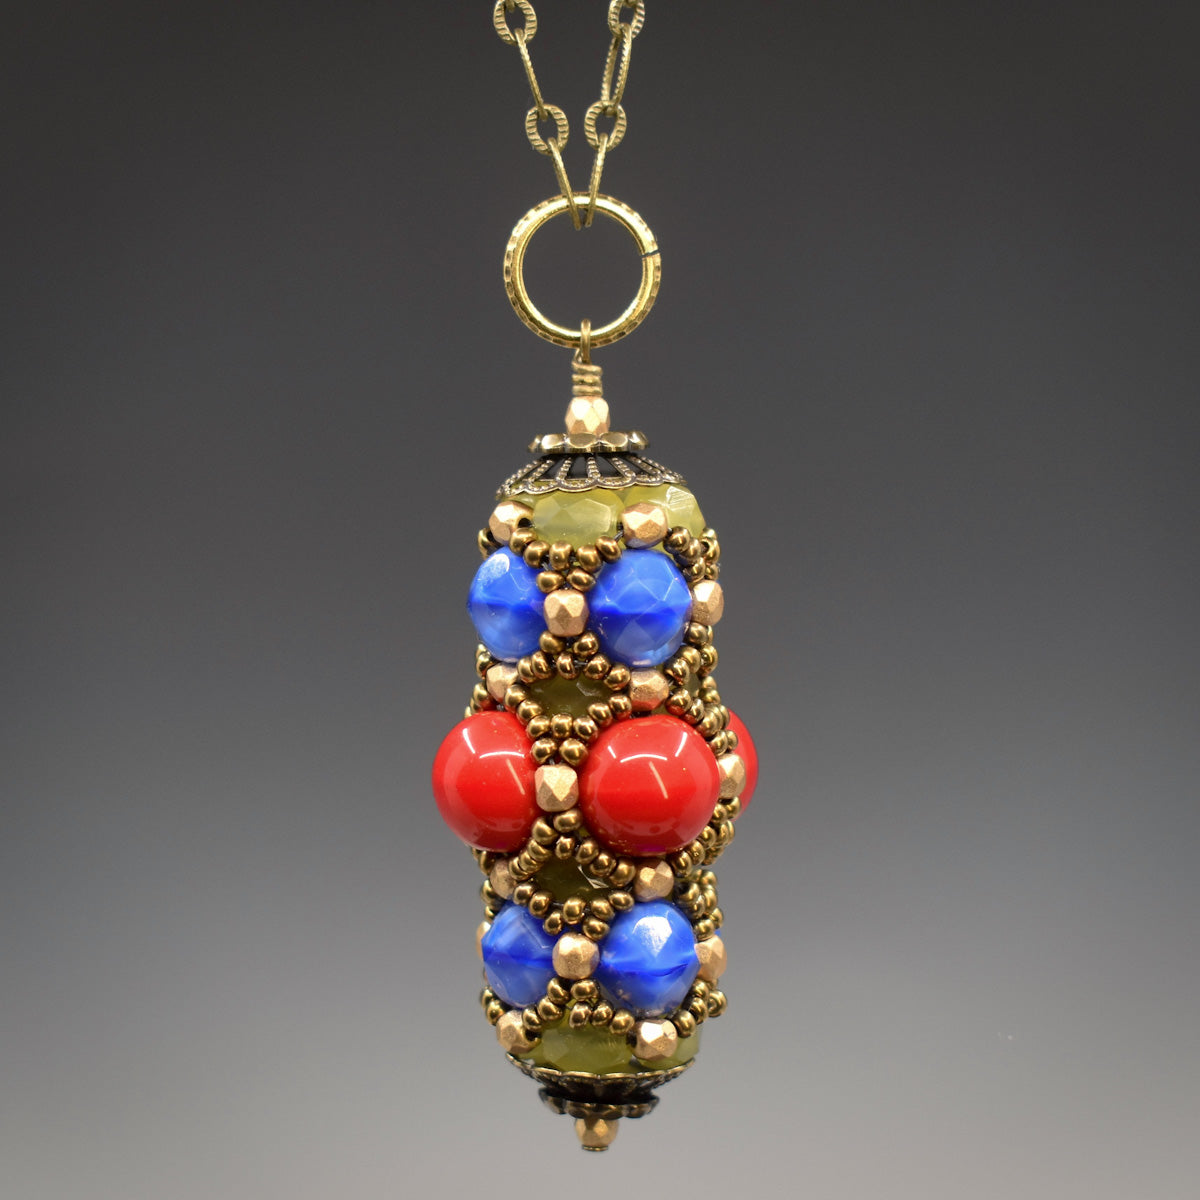 A red, blue, gold and yellow pendant hangs from a gold colored ring. This pendant has a wrm red row of beads in the center and swirly medium blue beads form the outer rows. Pale yellow beads are just visible underneath an overlay of gold seed beads. The pendant is secured between gold colored filigree style bead caps. 